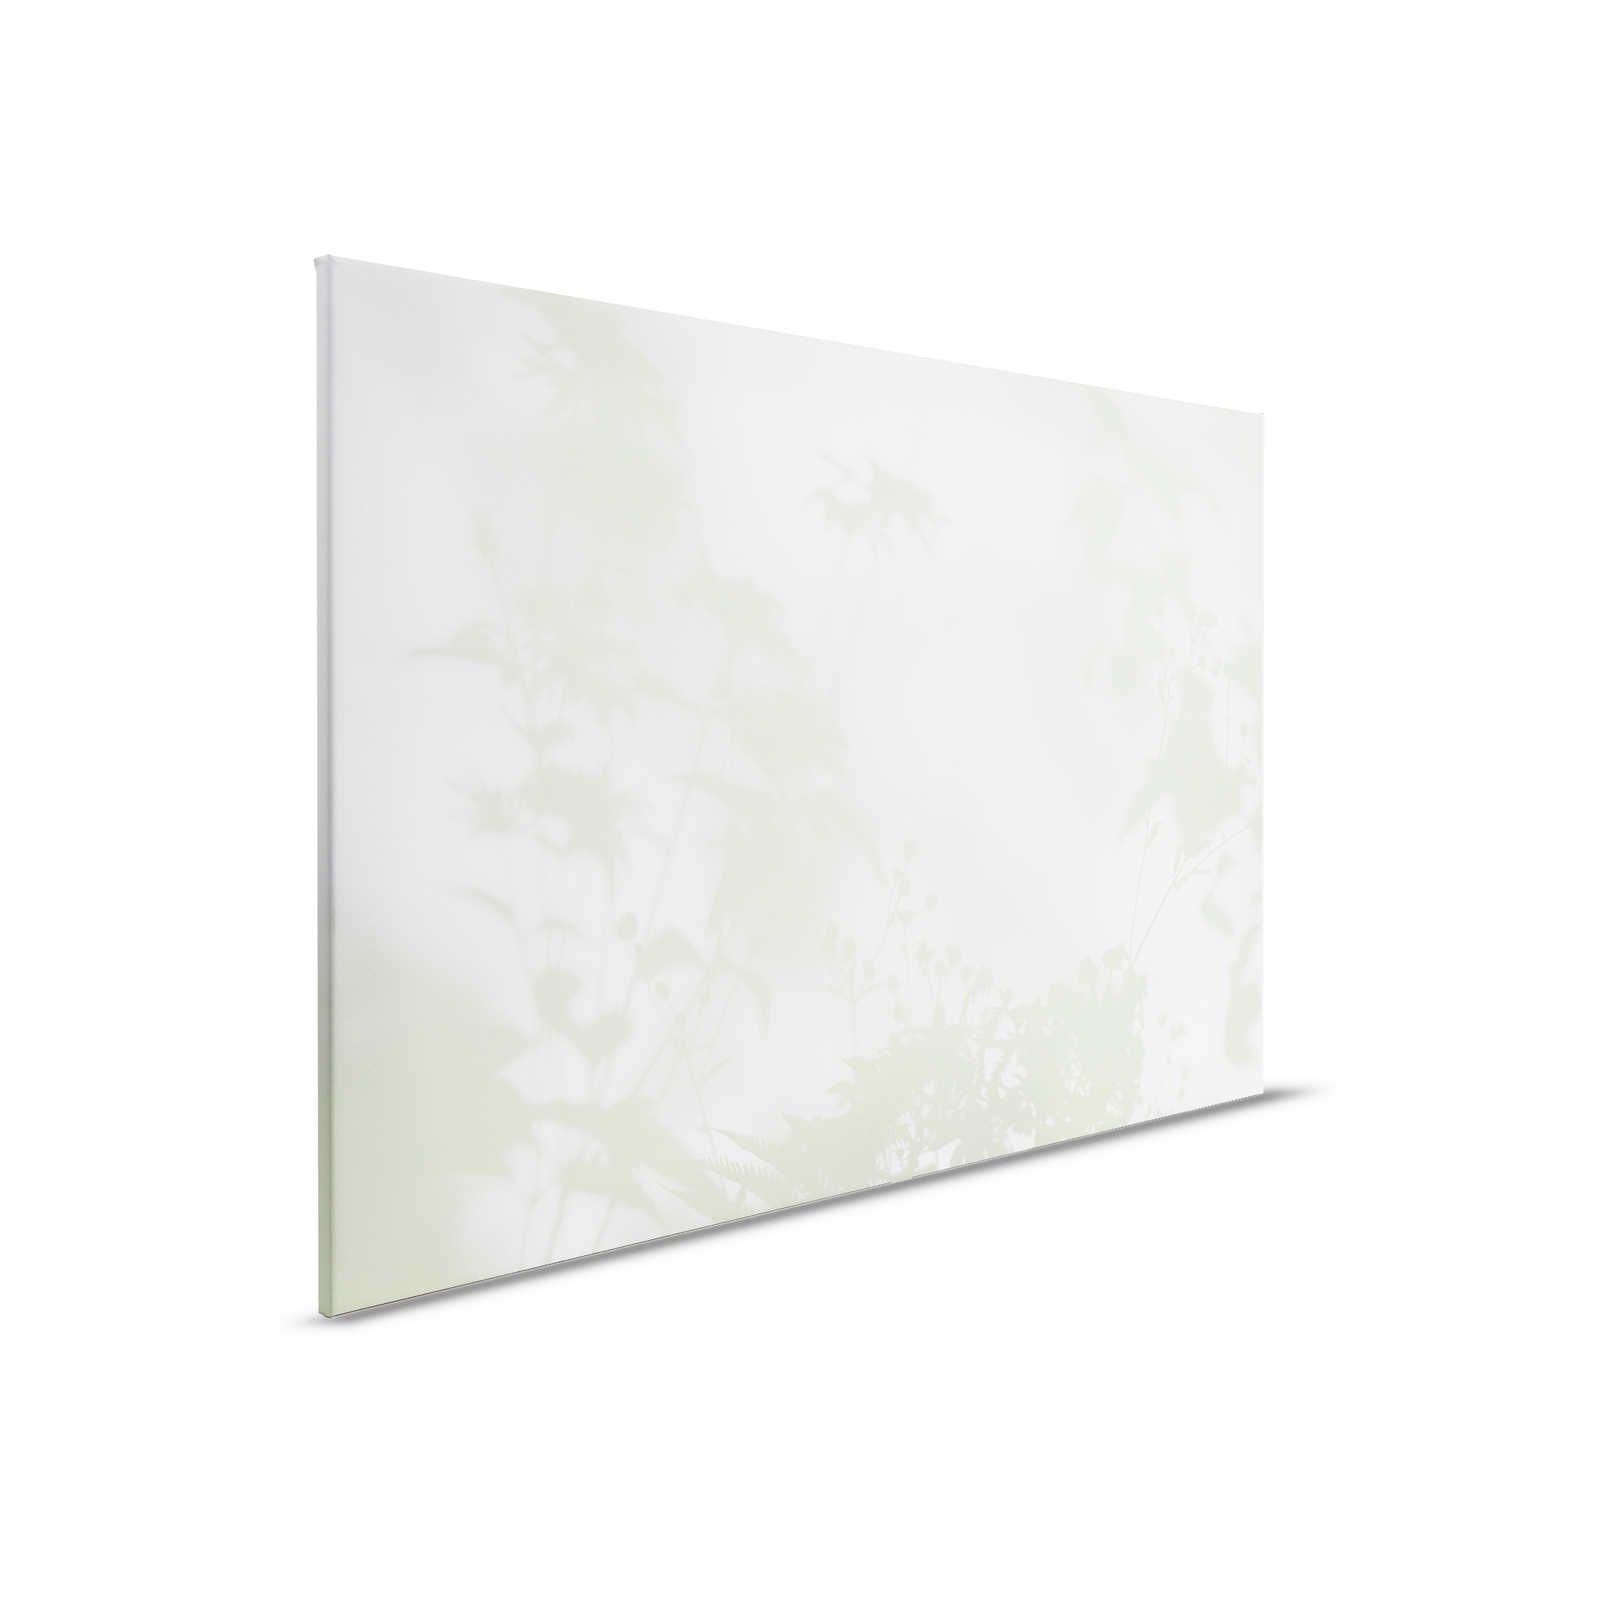 Shadow Room 3 - Nature Canvas Painting Green & White, Faded Design - 0.90 m x 0.60 m
